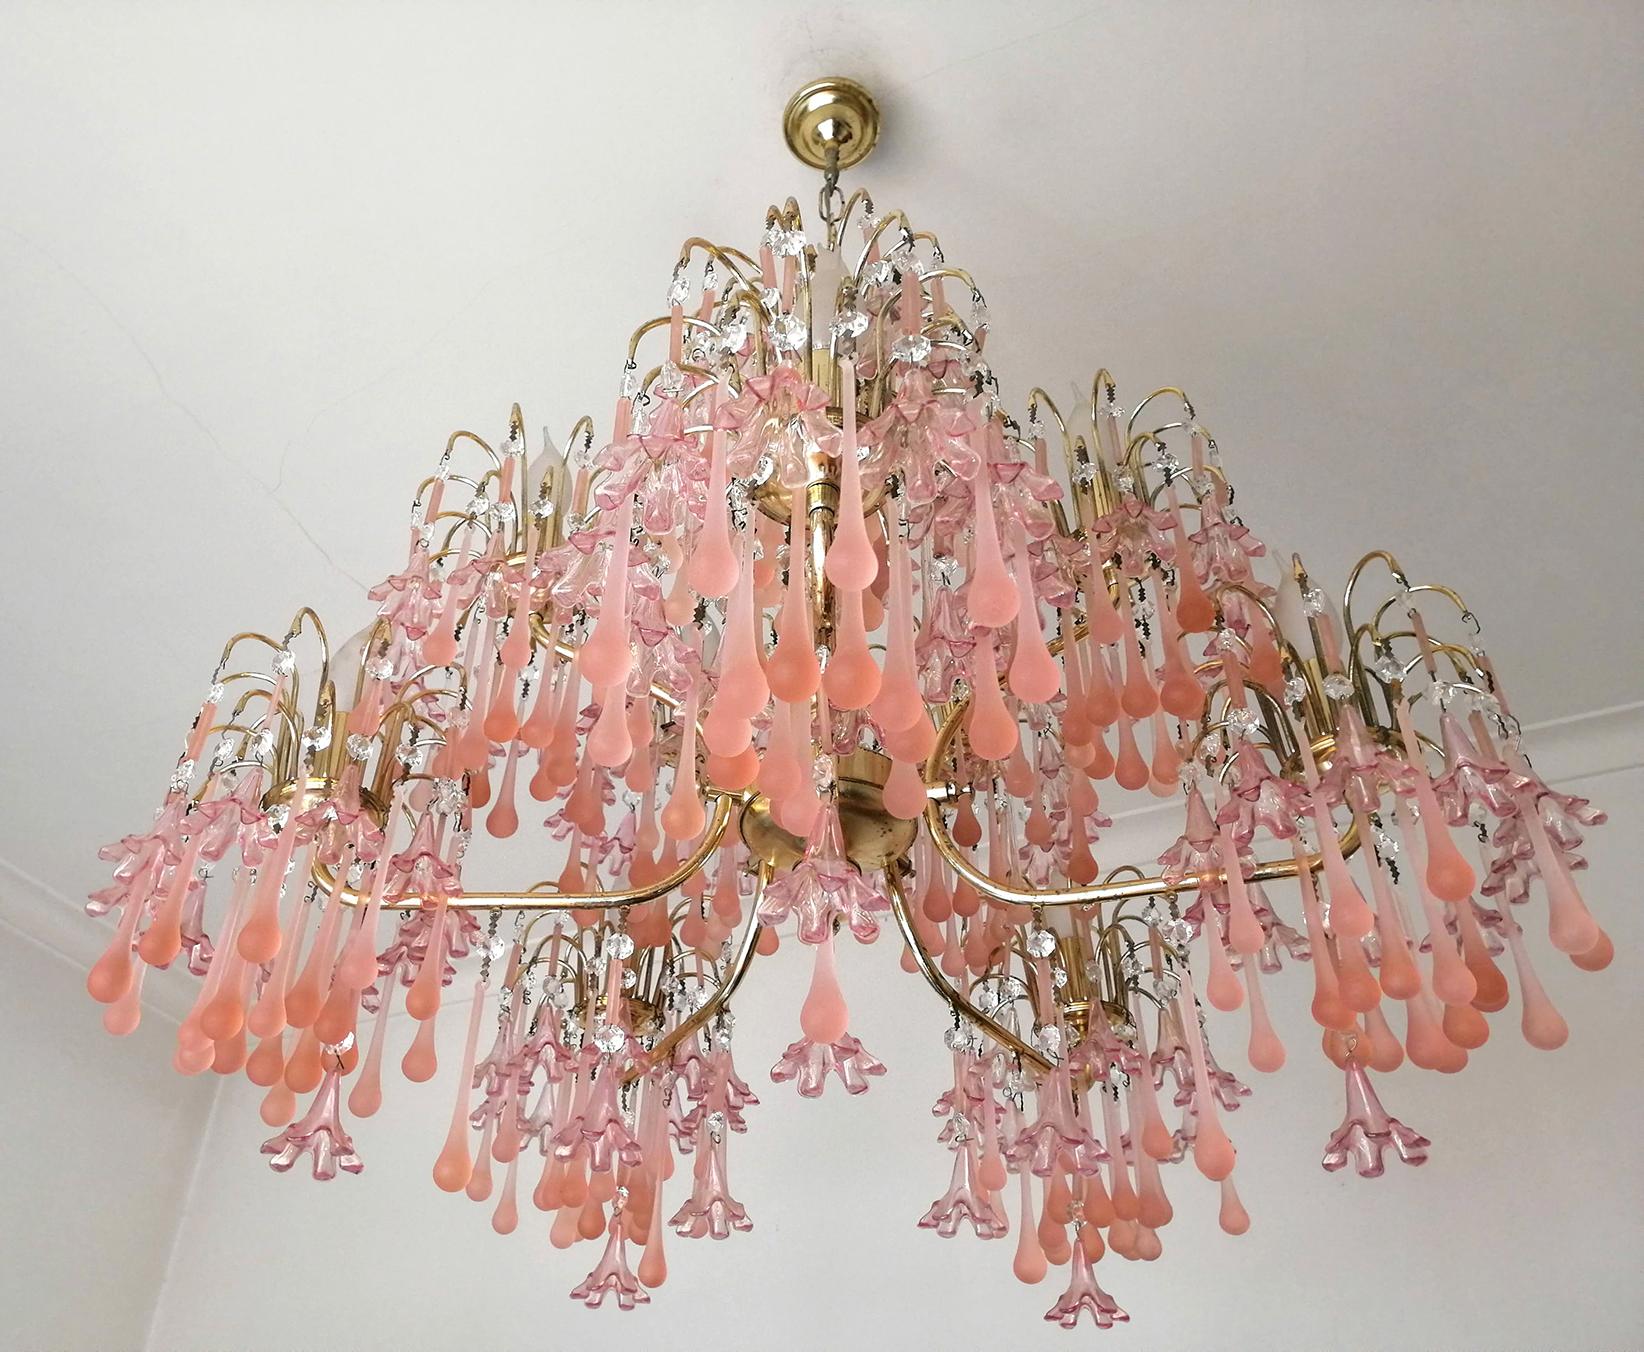 Midcentury Italian Murano Pink Glass Flowers Waterfall Wedding Cake Chandelier In Good Condition For Sale In Coimbra, PT